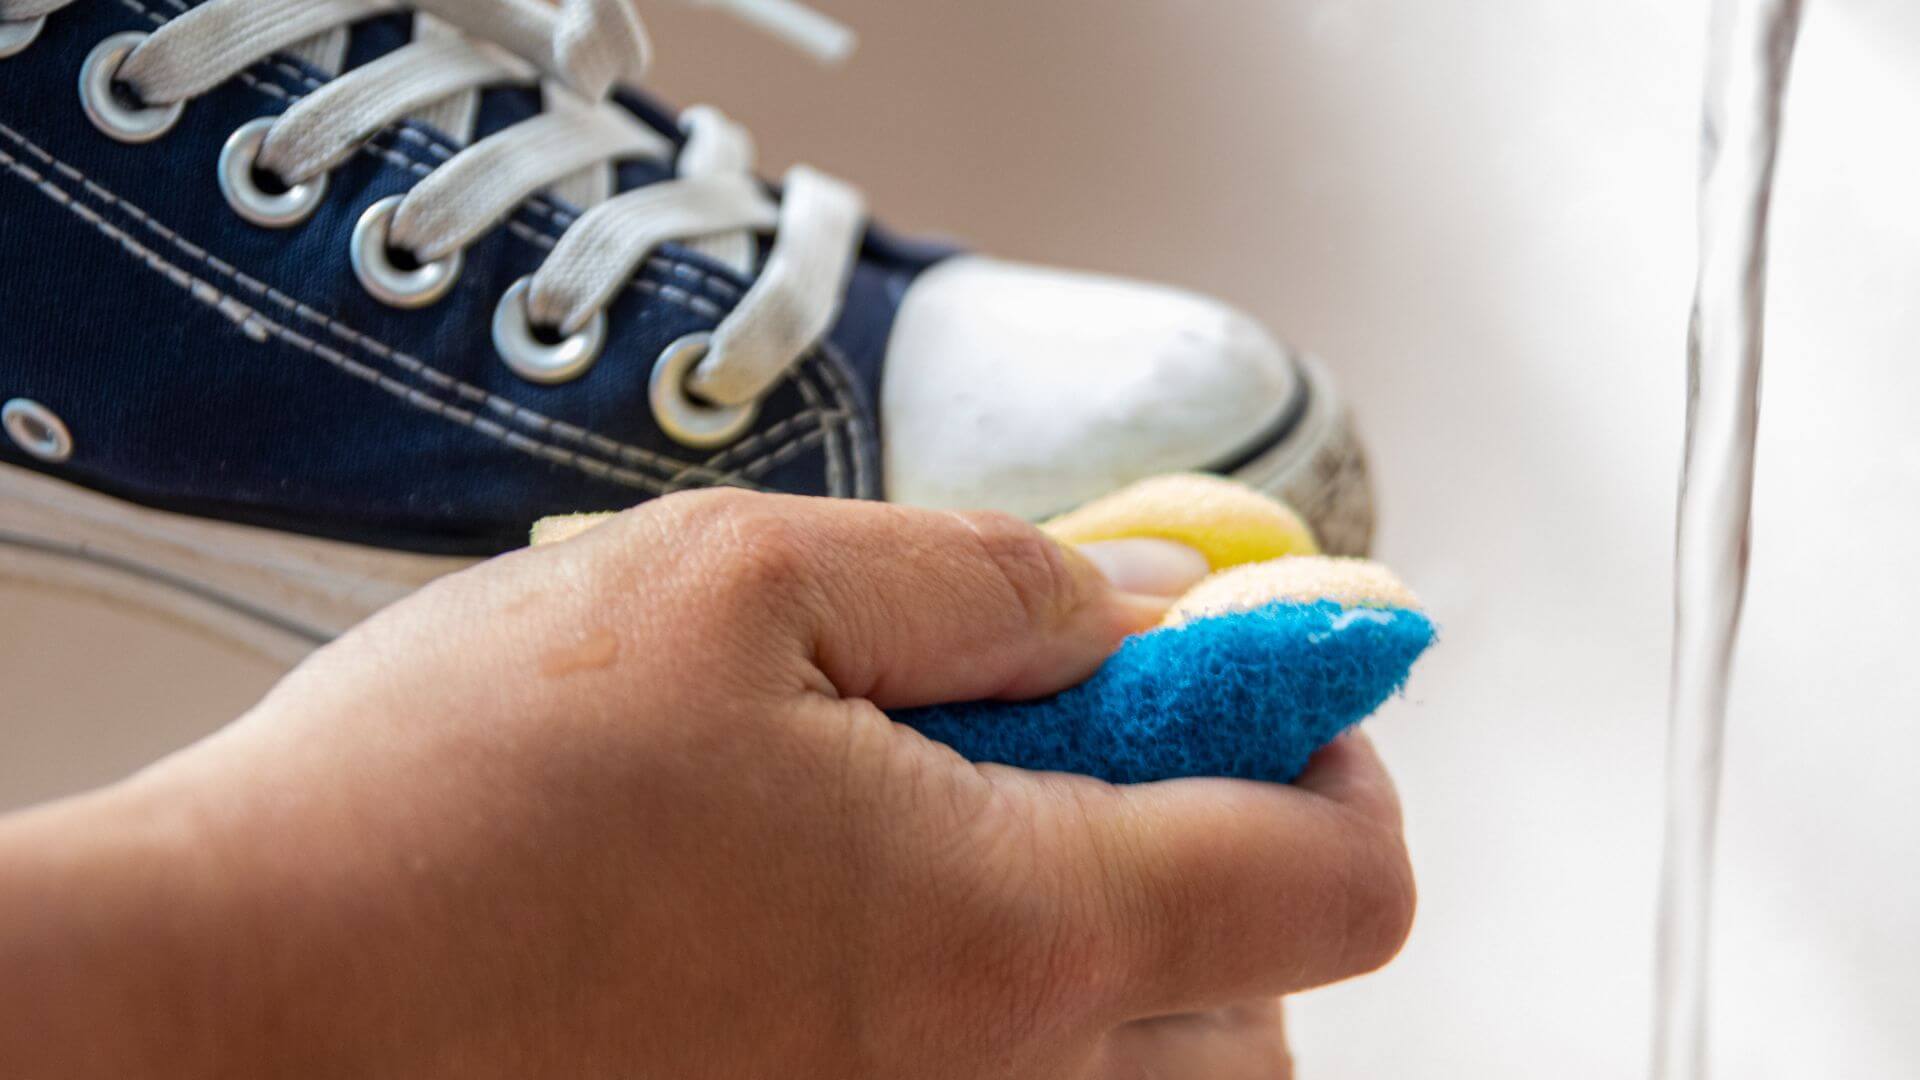 How to Clean Your Shoes: Simple Steps to Make Shoes Shine